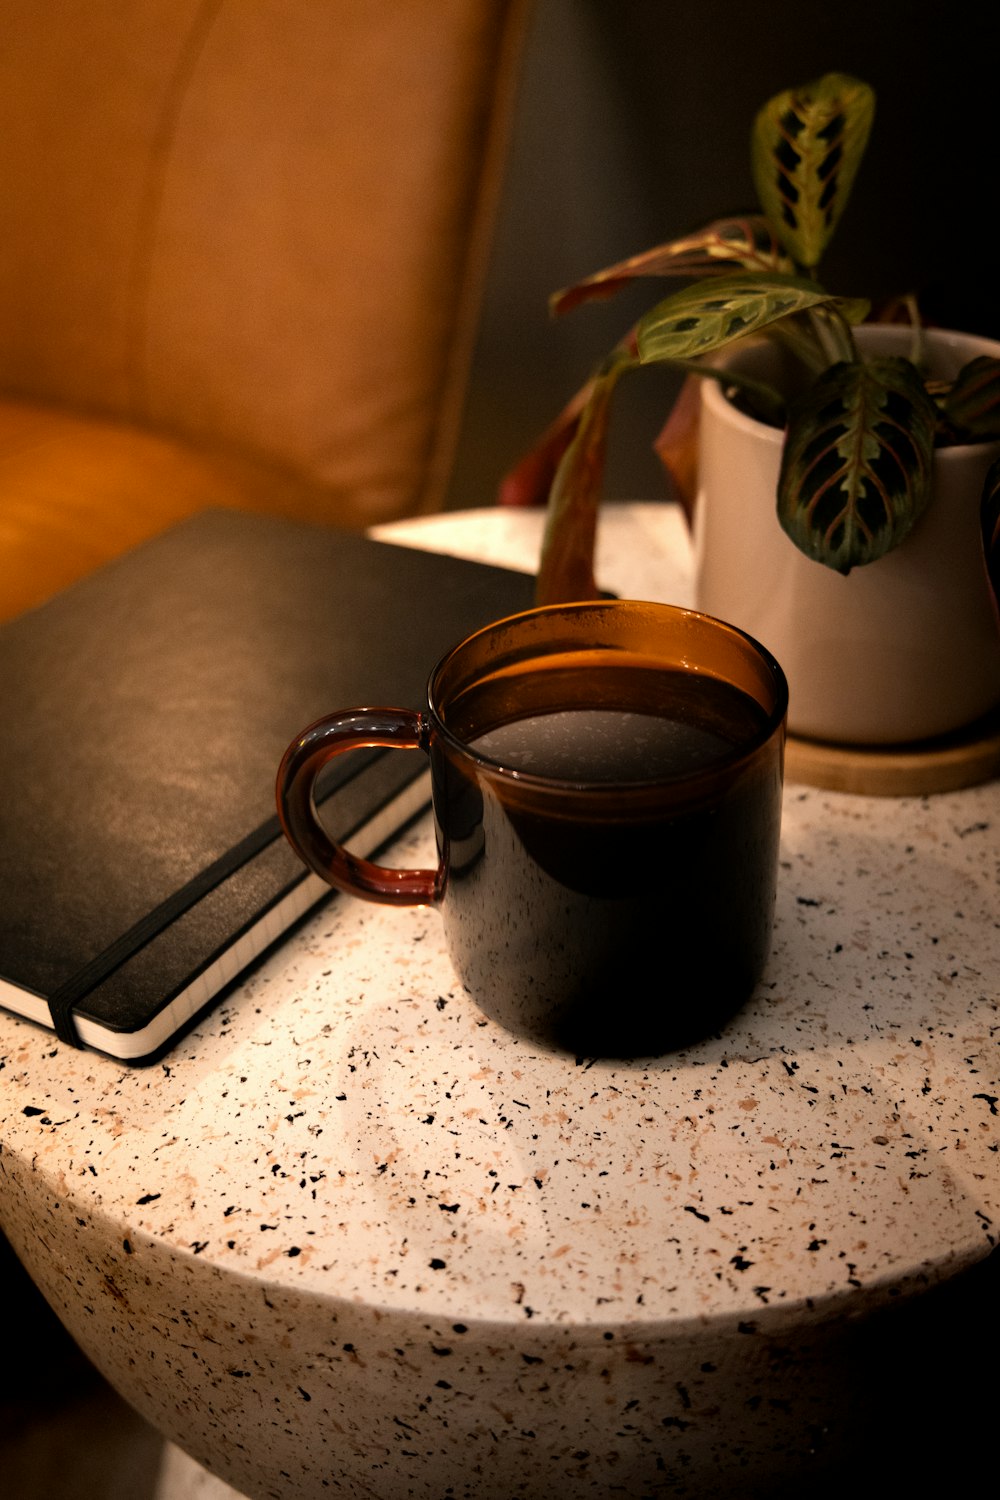 a book and a cup on a table